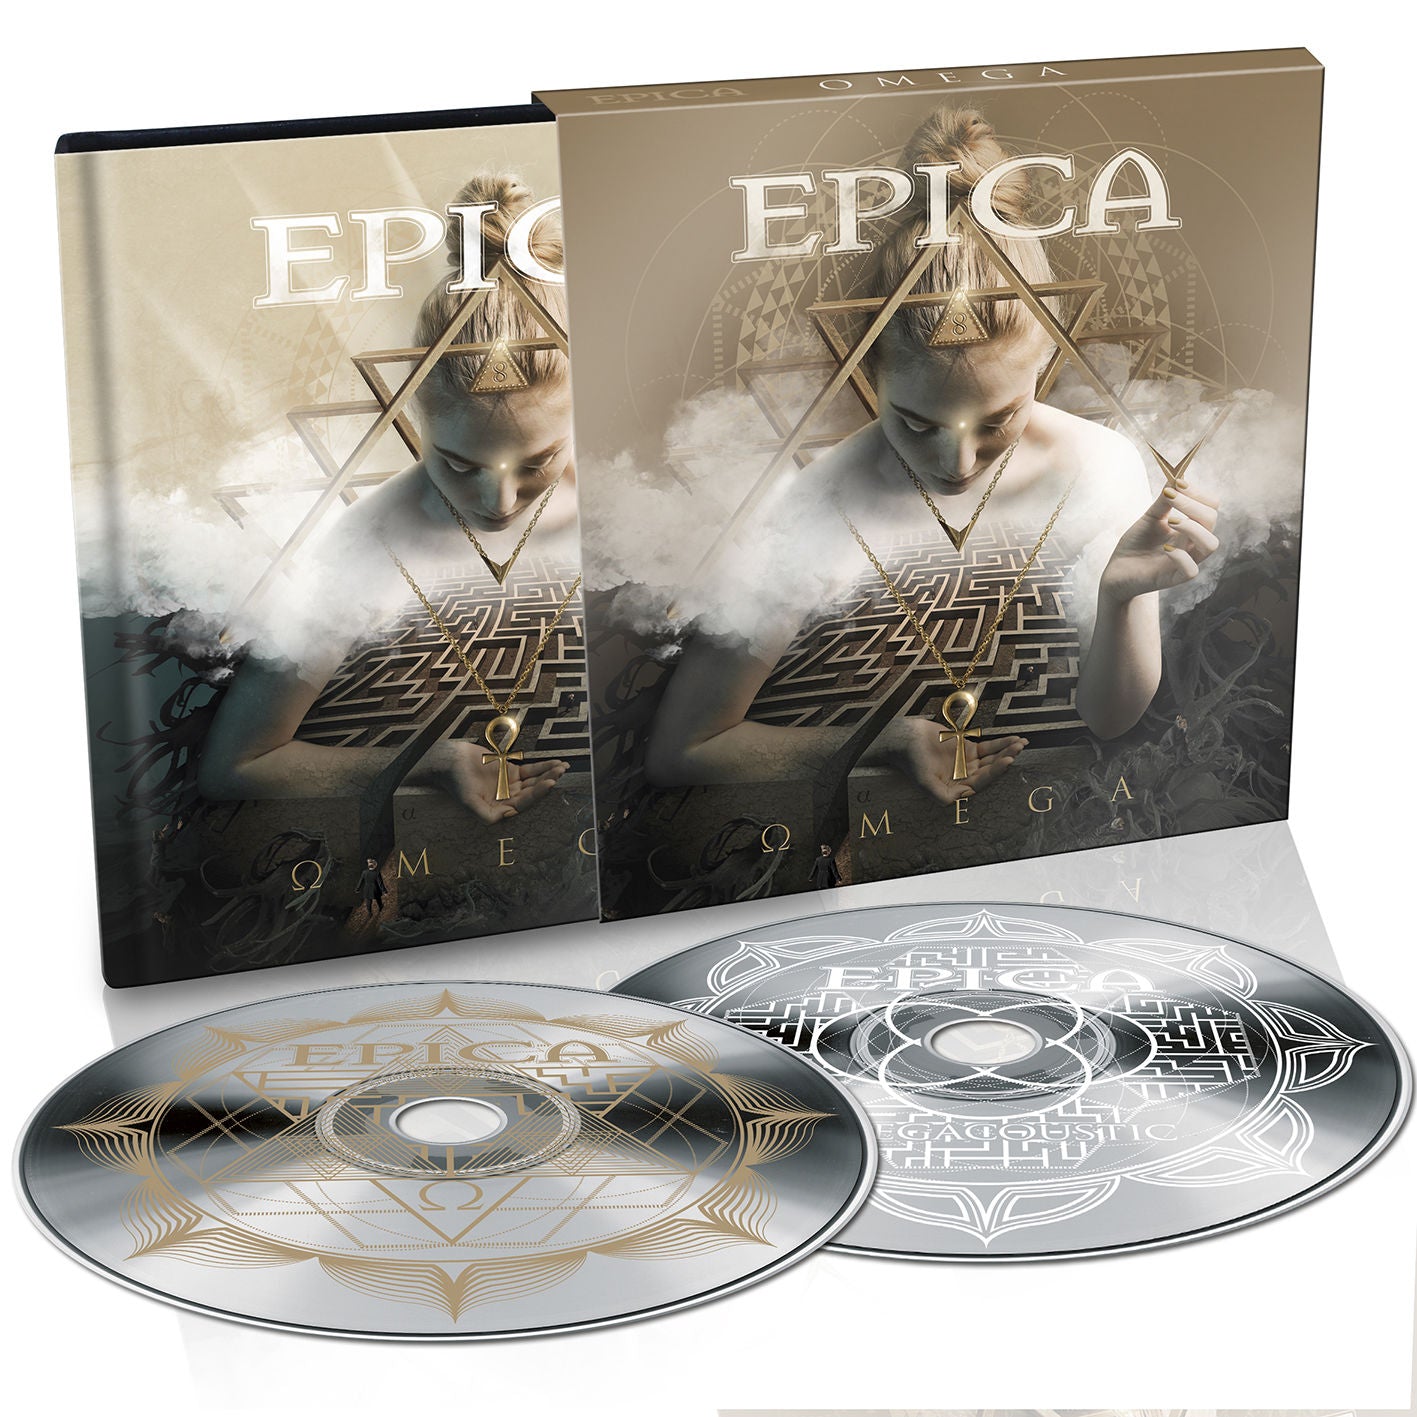 Epica - Omega: Limited Edition 2CD